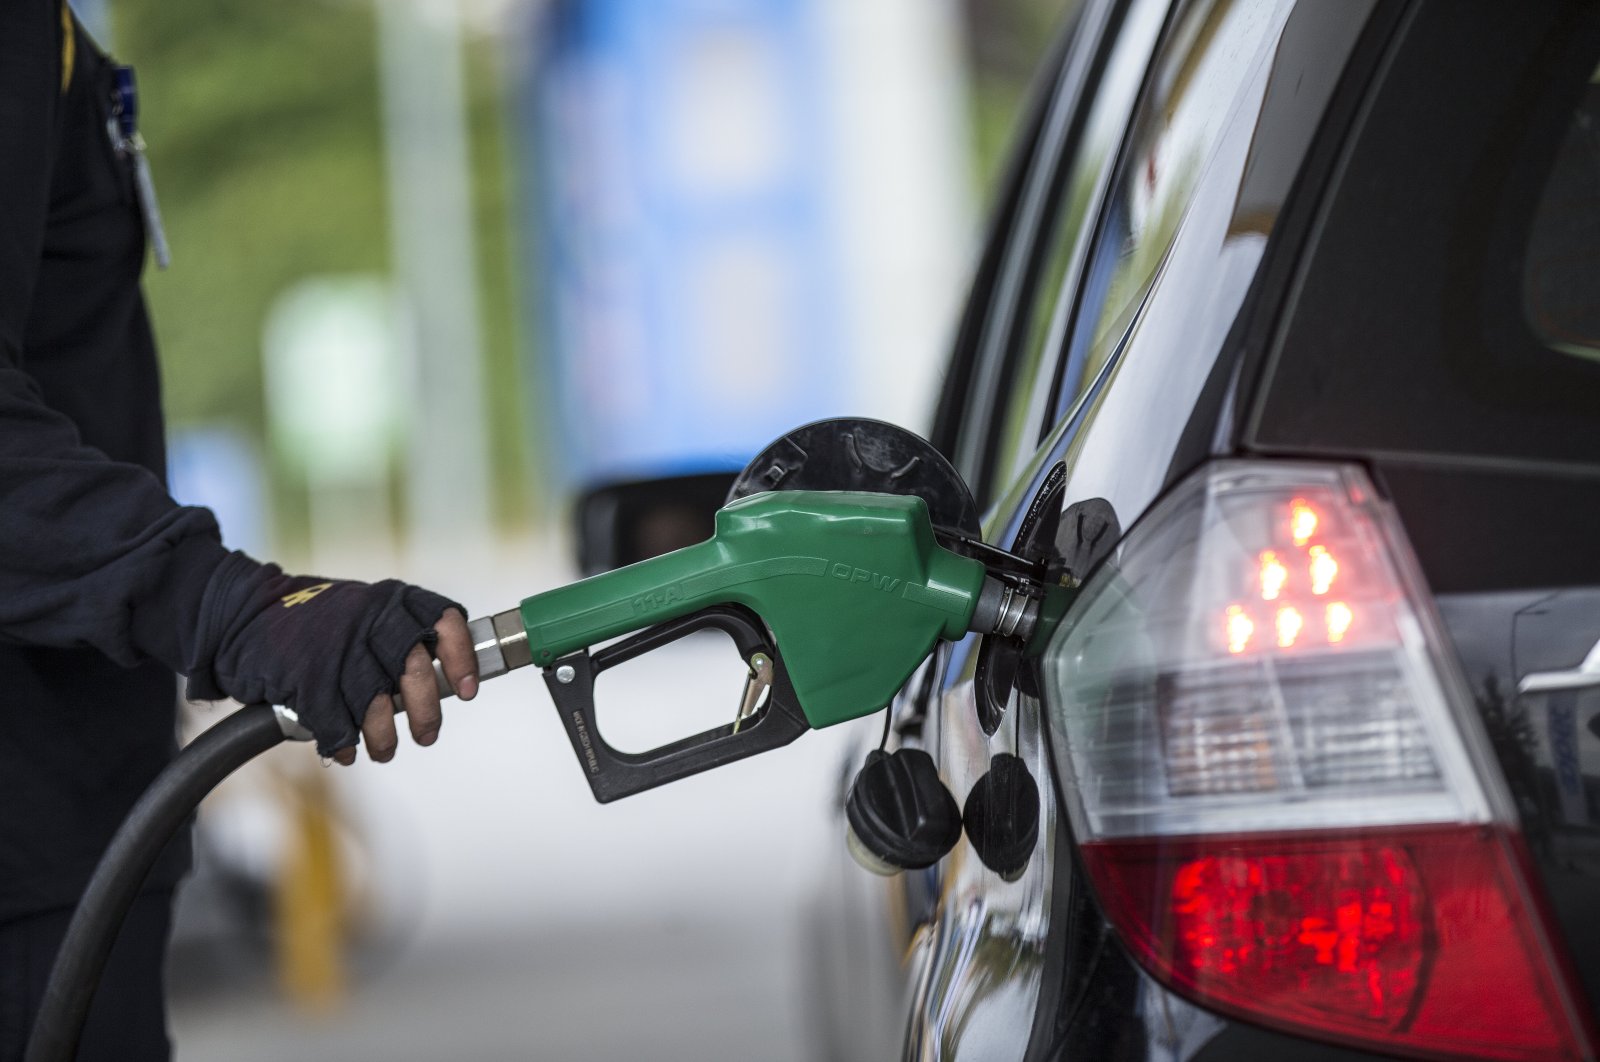 The sharp rise in sales comes after the country announced discounts of TL 0.60 per liter on gasoline and TL 0.55 per liter on diesel fuel. (AA Photo)